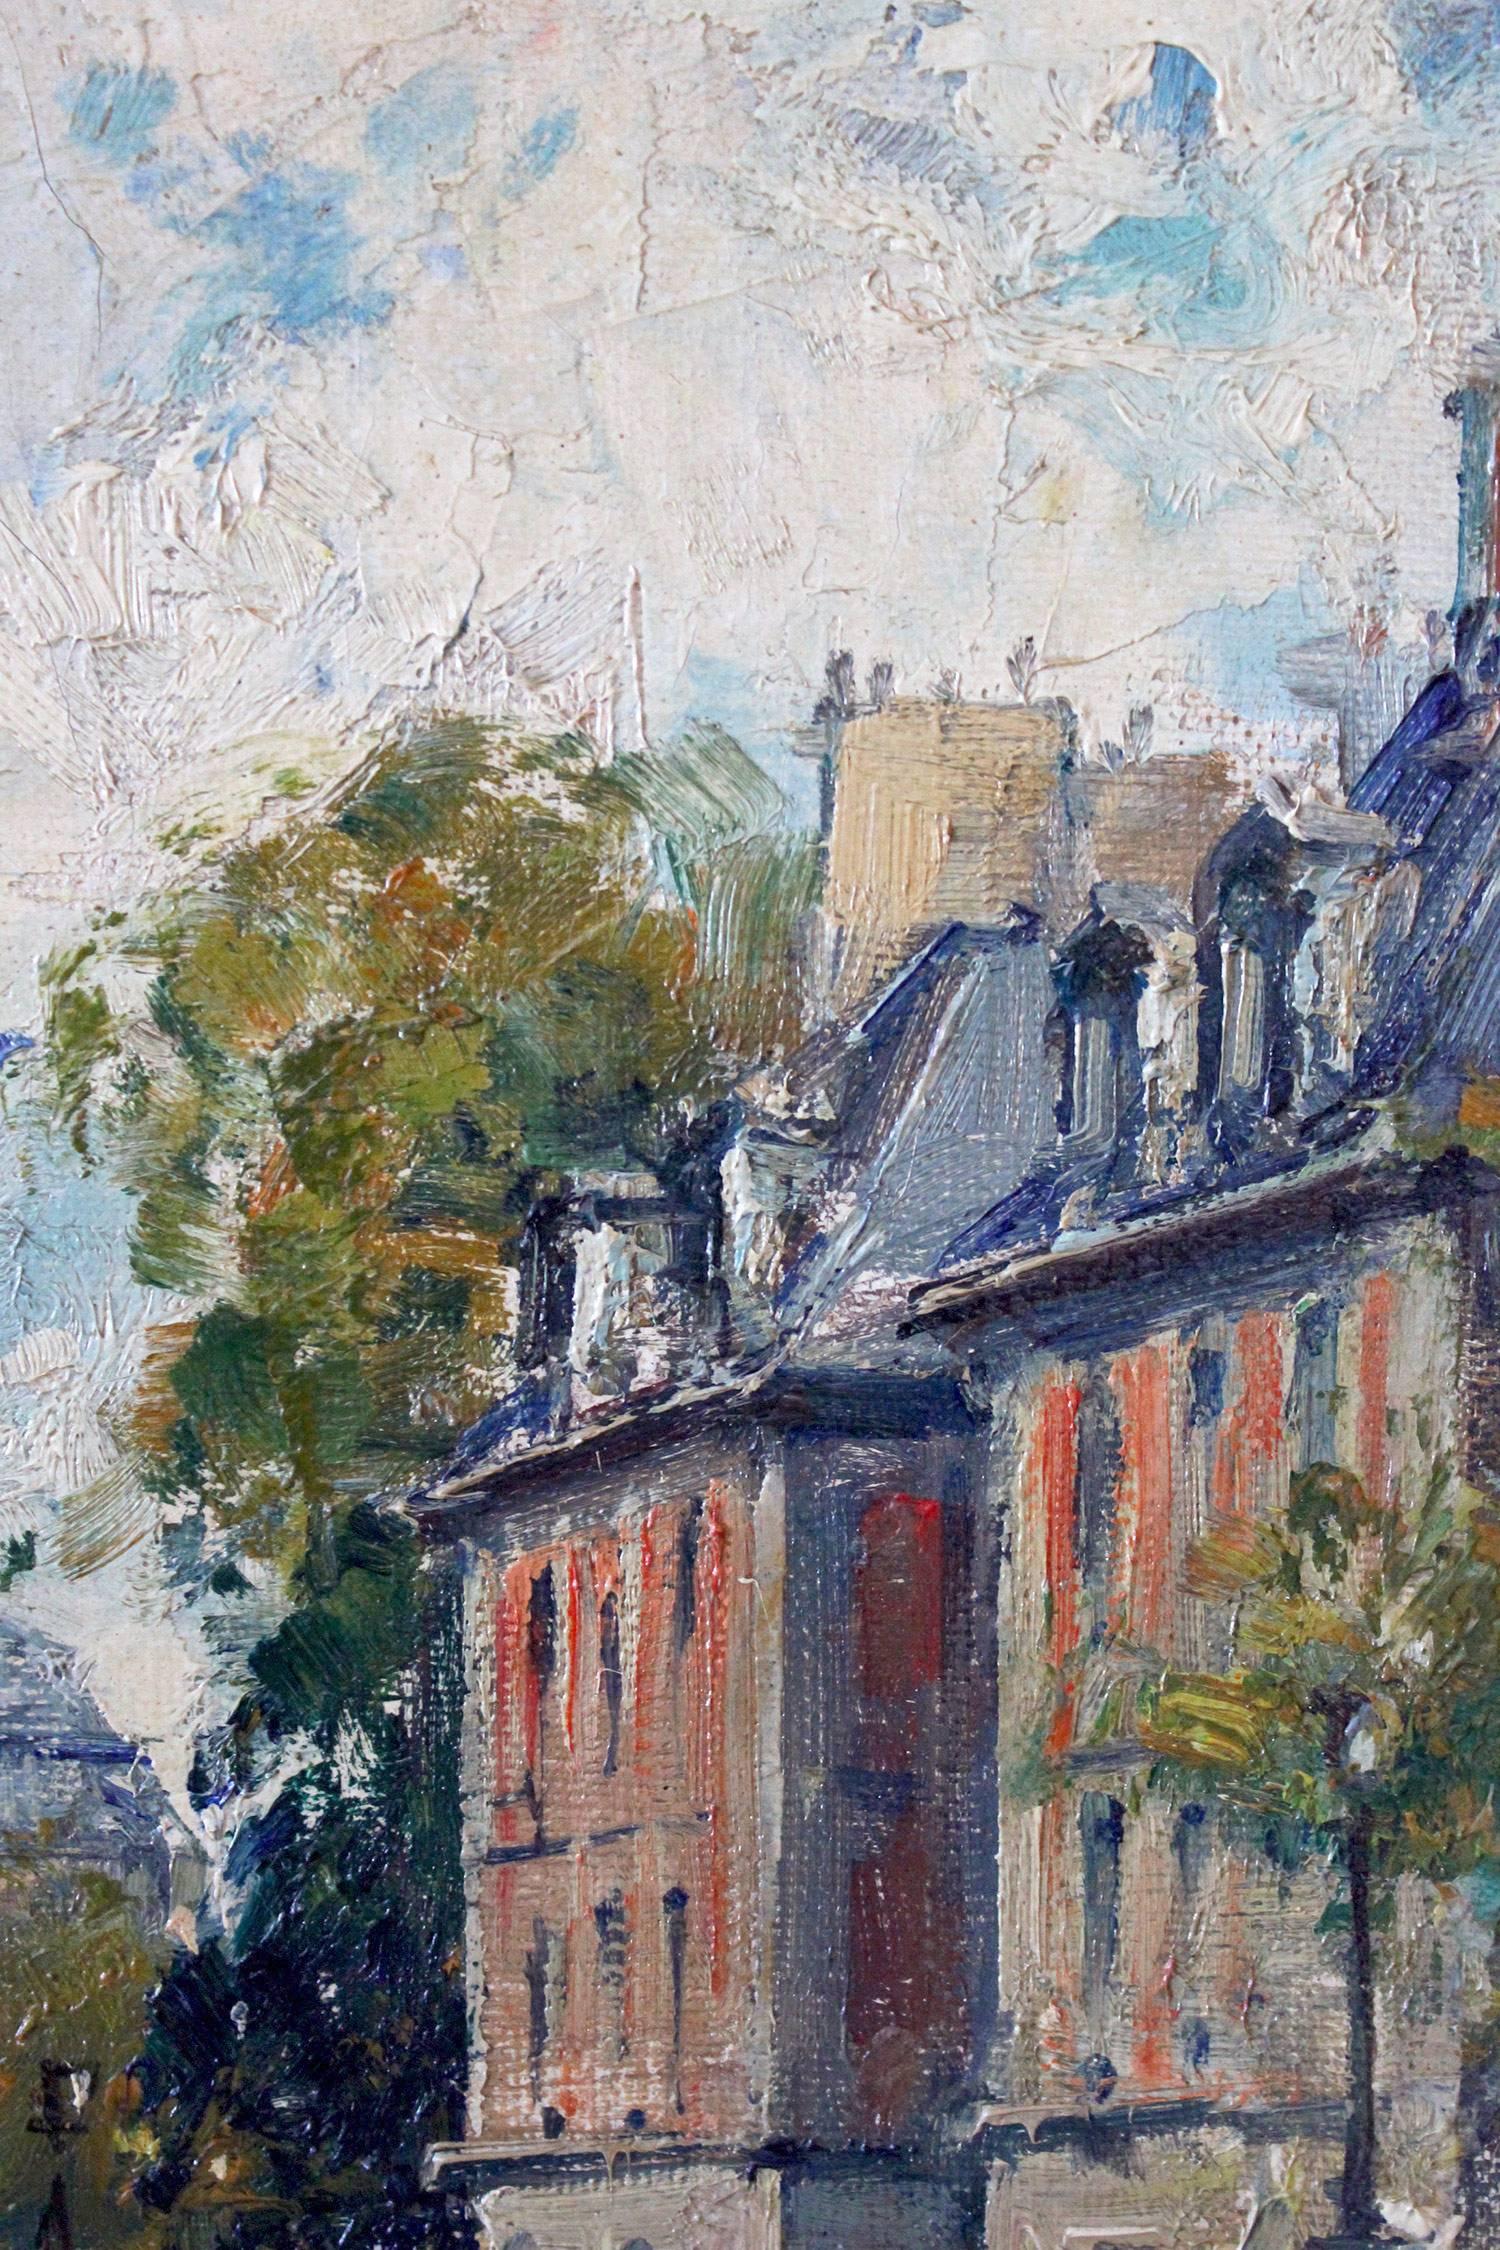 A beautiful oil on canvas painting by the French artist, Jean Salabet. Salabet was a Parisian painter known for his colorful cityscapes depicting the times of his generation. His work is comparable to those of Jules Herve, Antoine Blanchard and